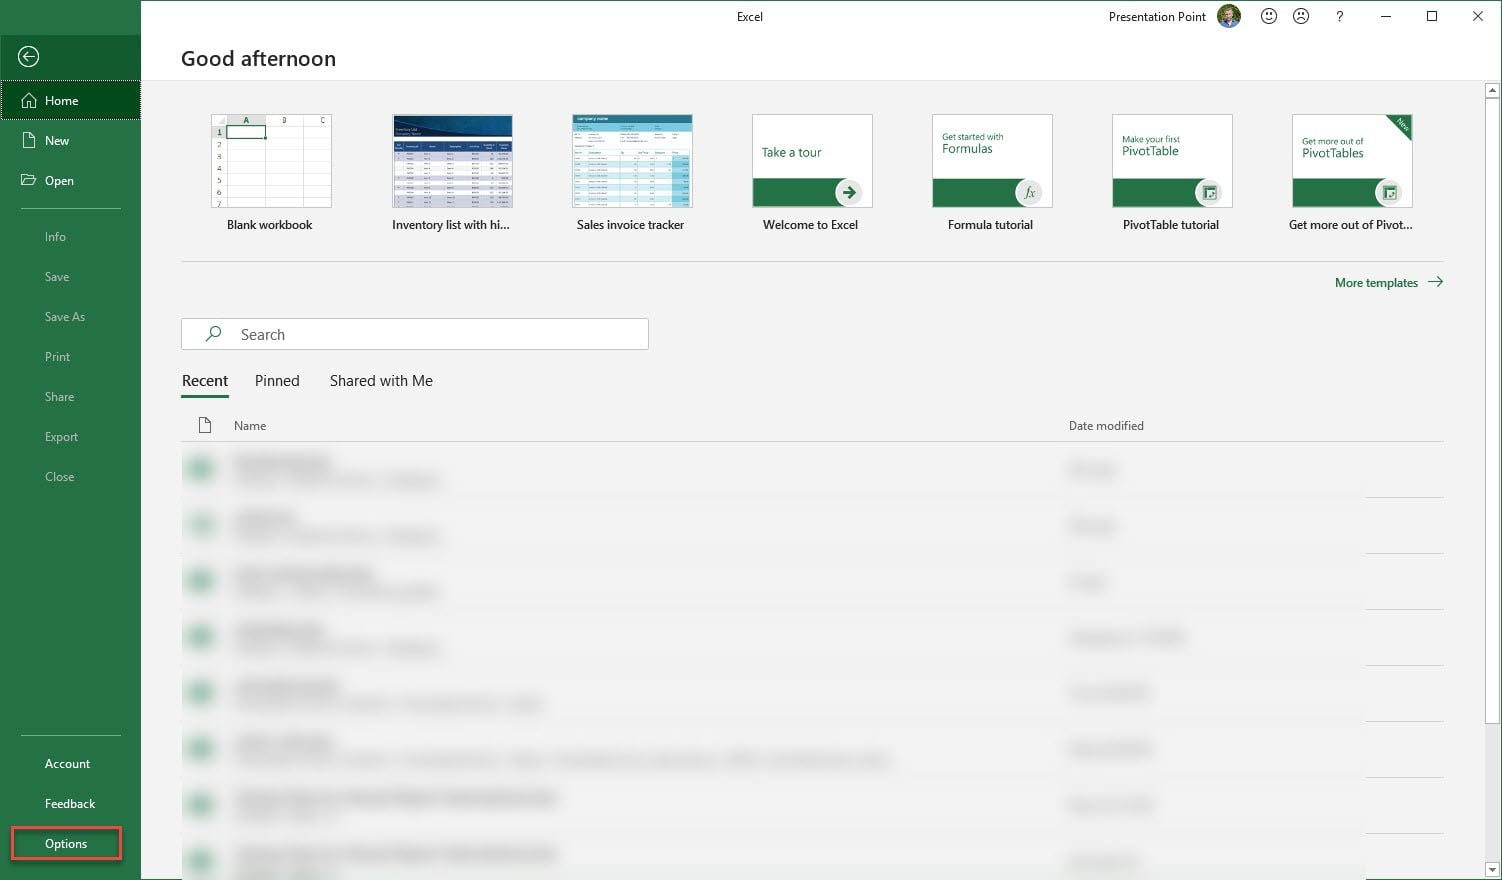 how to share excel workbook in office 365